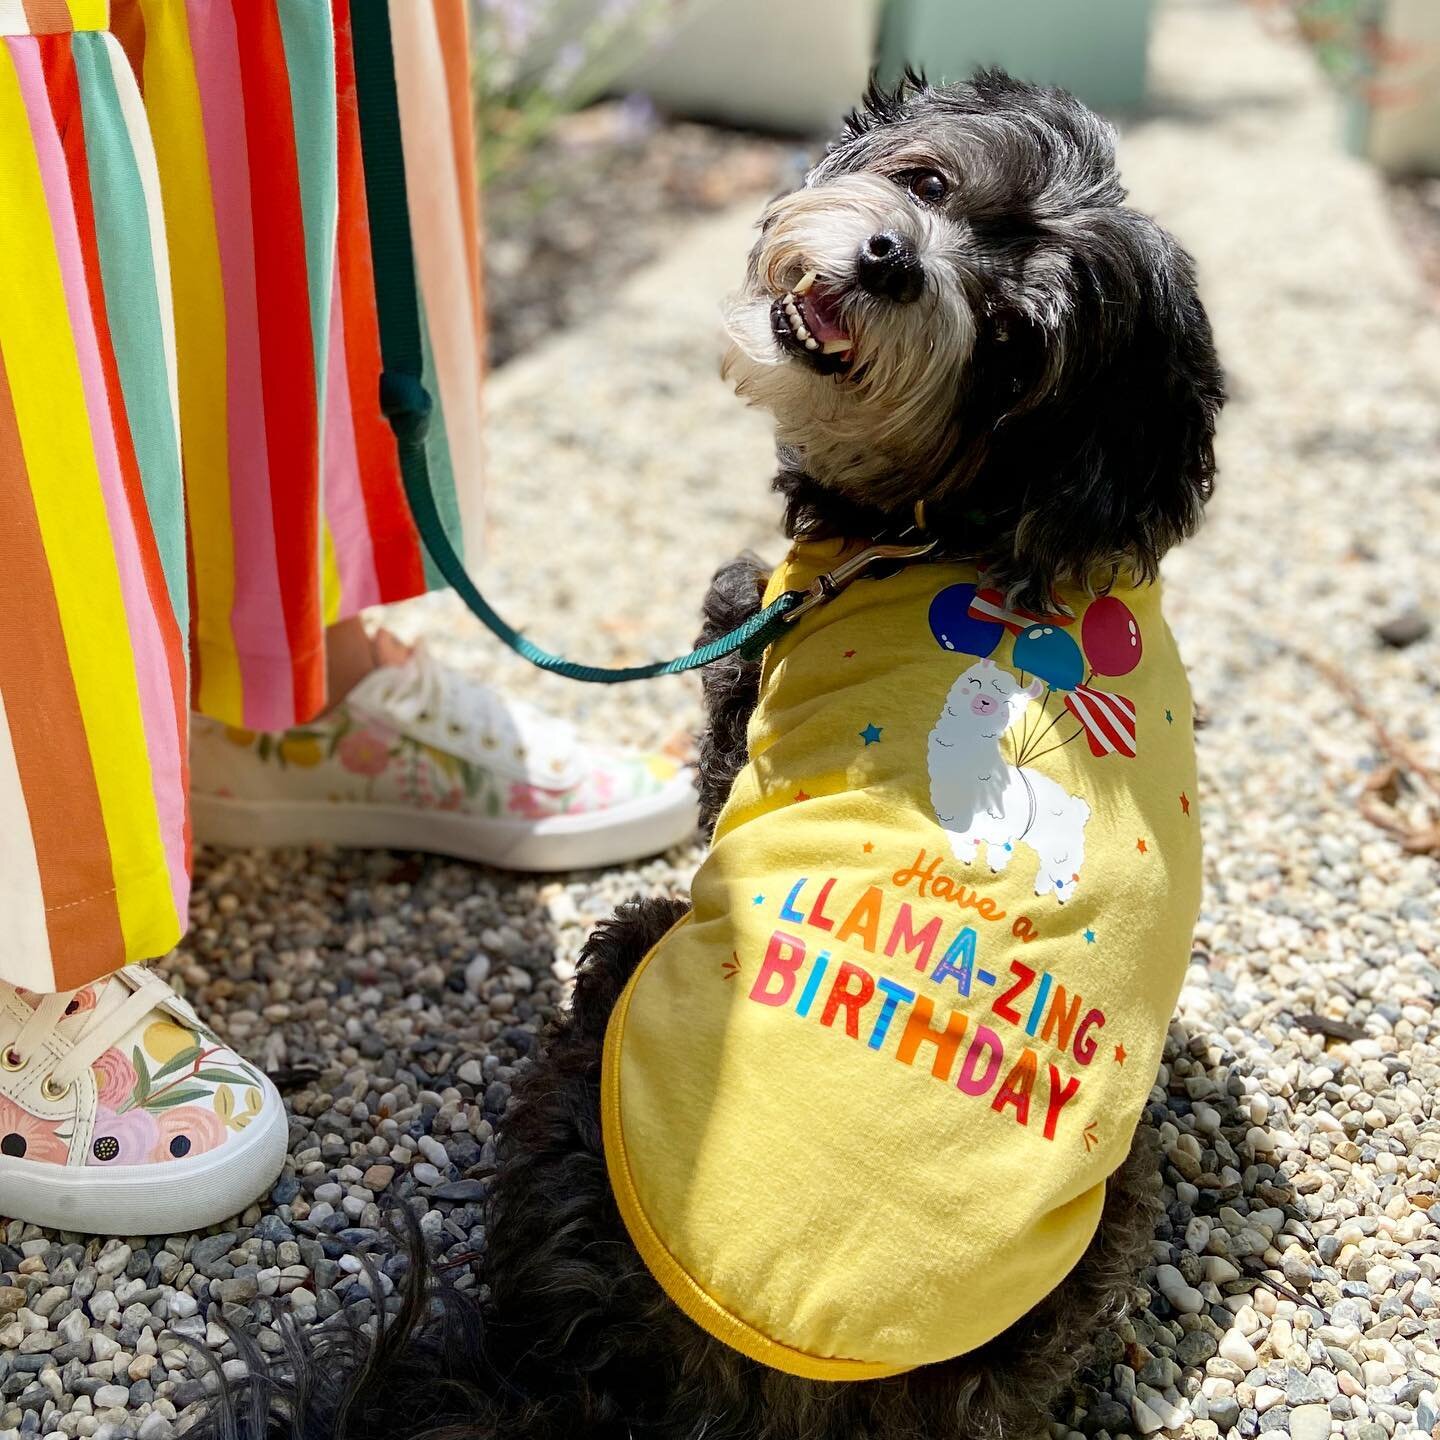 All smiles as we celebrate my llama-zing bestie&rsquo;s 12th birthday!!! ❤️🧡💛💚💙💜 I&rsquo;m furever grateful we become more codependent with each passing day. 🎉🎂🍦🥳 📸:@kristaskehan